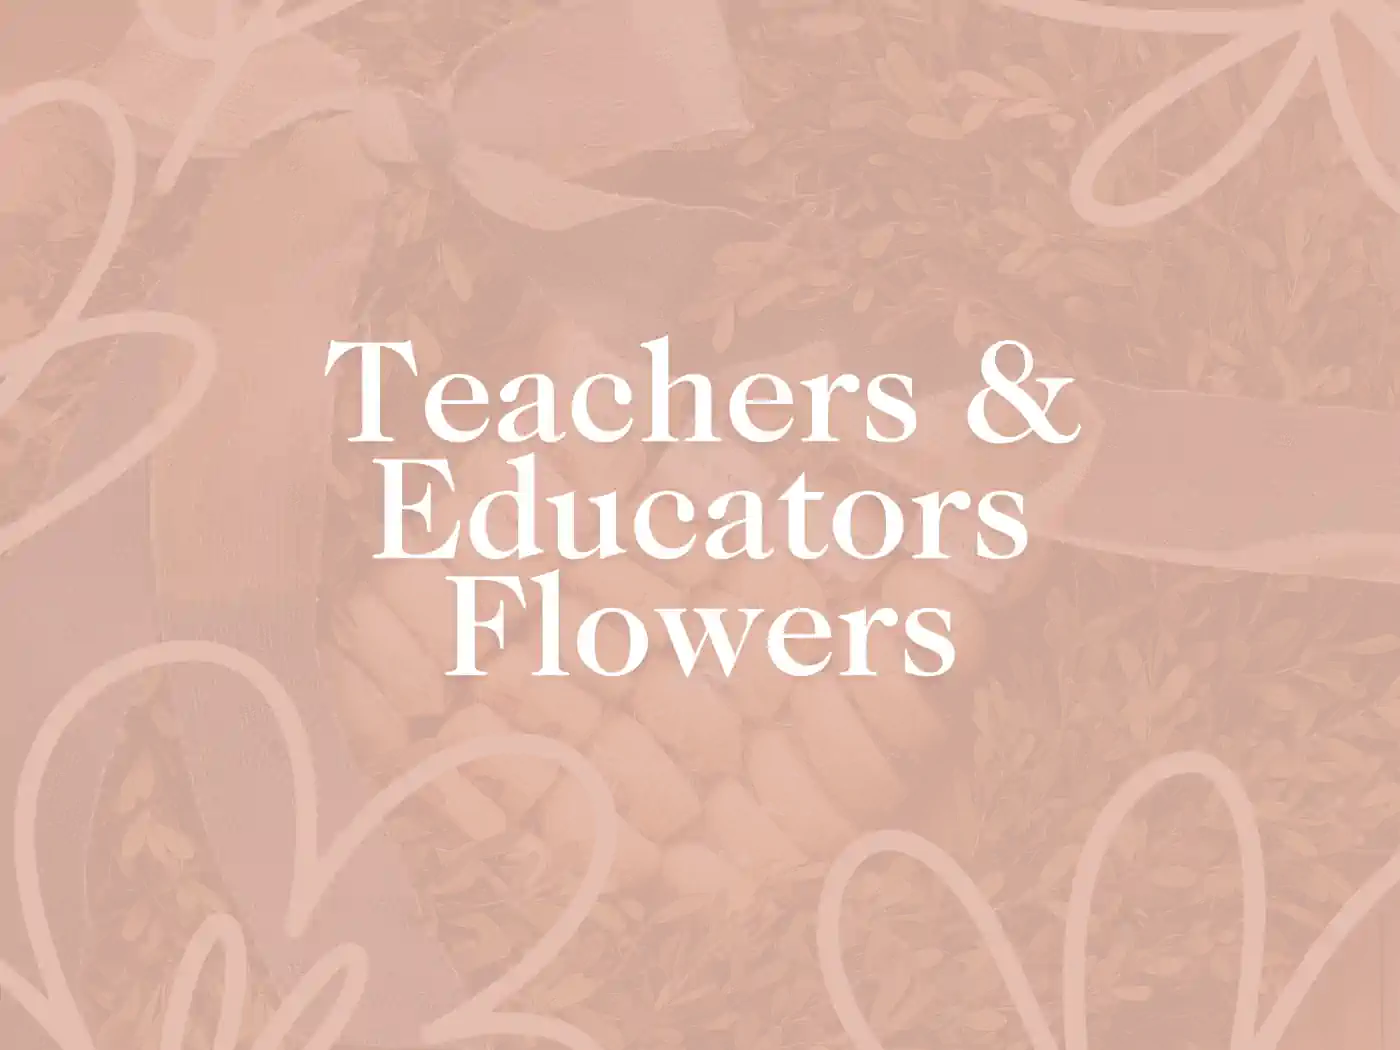 Elegant promotional image featuring text 'Teachers & Educators Flowers' over a soft floral background with ribbon details. Teachers & Educators Flowers. Delivered with Heart. Fabulous Flowers and Gifts.